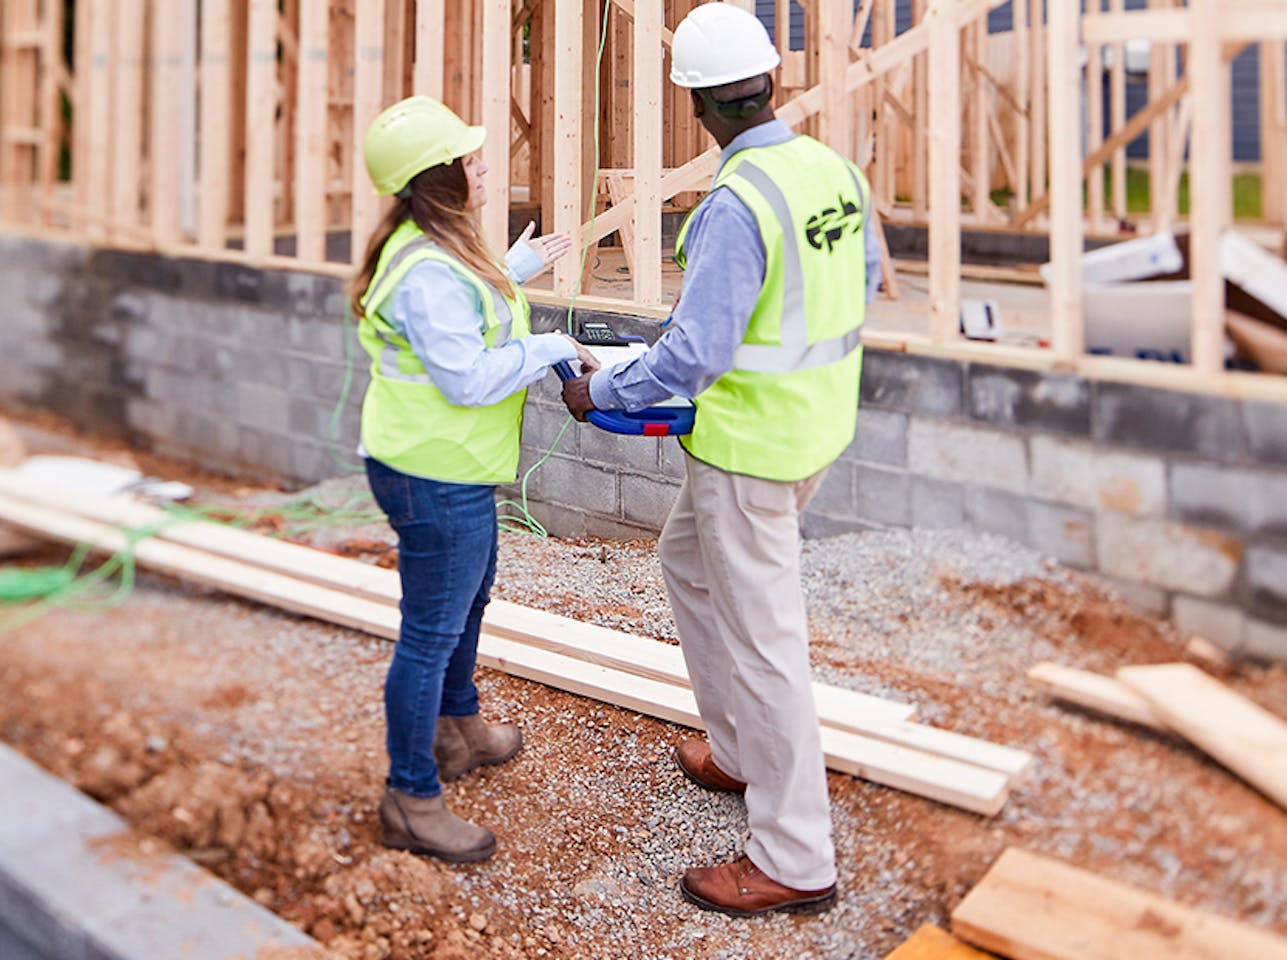 Check your newly built building with an energy checkup in Chattanooga